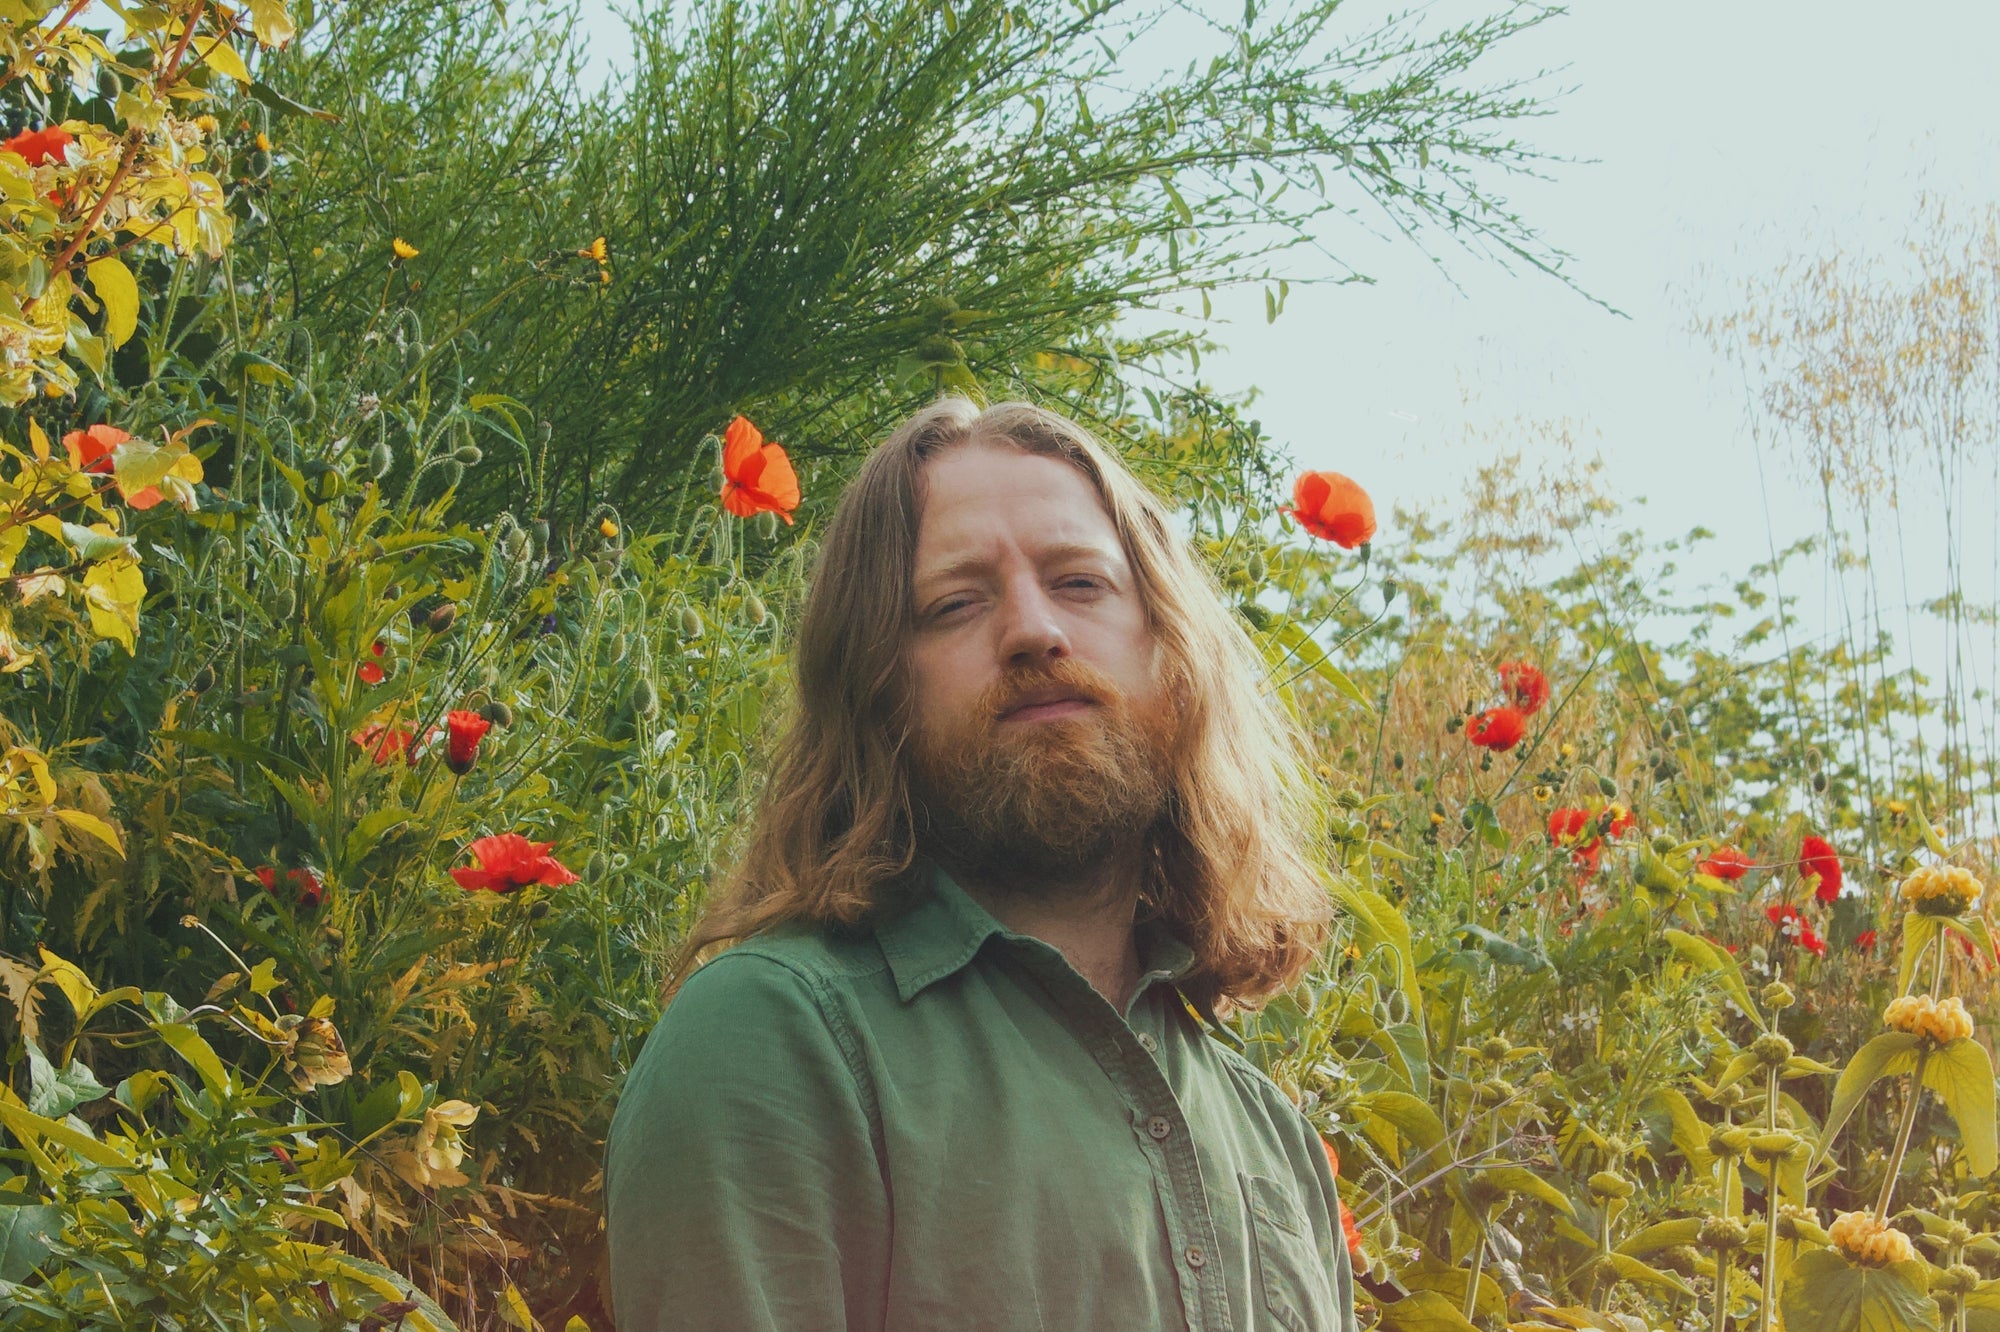 Ryan McMurtry's 'Summer Rain' Ushers in a Wave of Psychedelic Folk Nostalgia